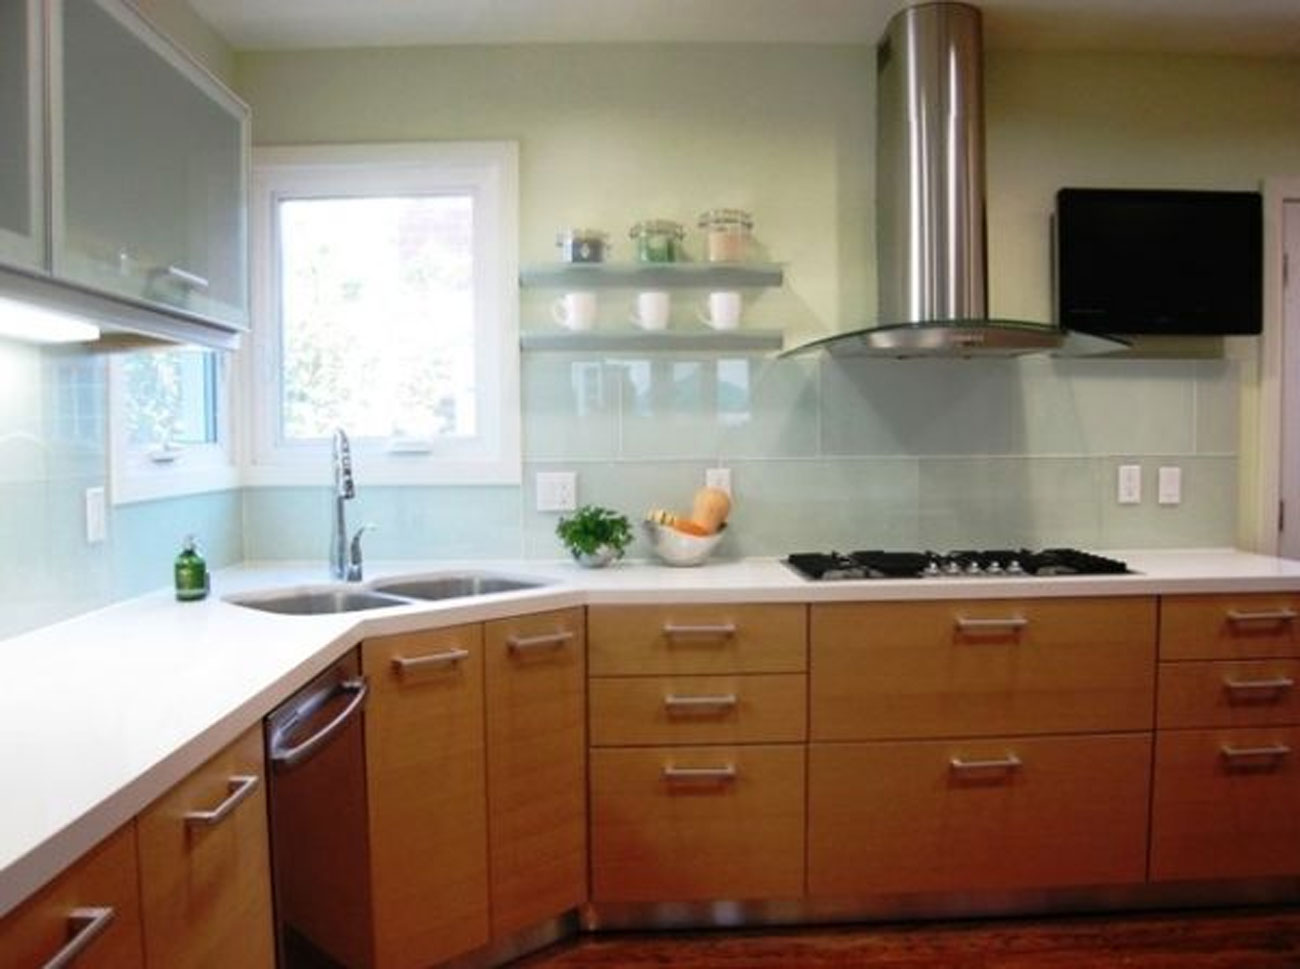 Small Kitchen Corner Modern Small Kitchen Design With Corner Sink Ideas And Interesting Kitchen Cabinet Glass Door Designs Along With Cool Kitchen Stove Design Ideas Together With Wood Cabinet Kitchen The Balance Between The Small Kitchen Design And Decoration